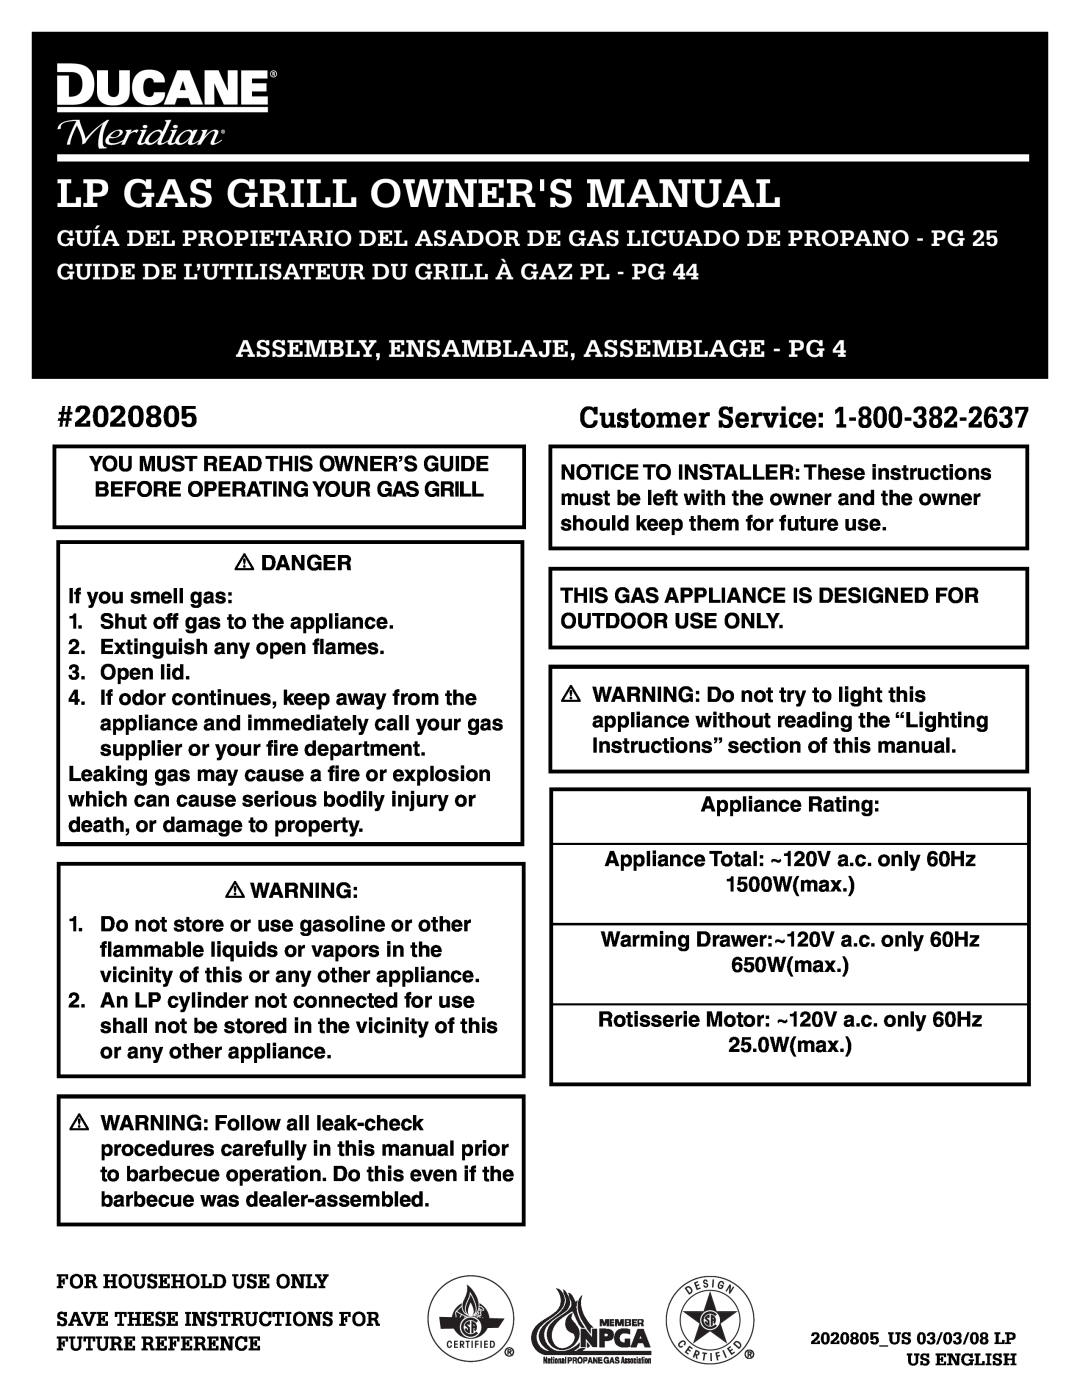 Ducane owner manual Lp Gas Grill Owners Manual, #2020805, Customer Service, Assembly, Ensamblaje, Assemblage - Pg 